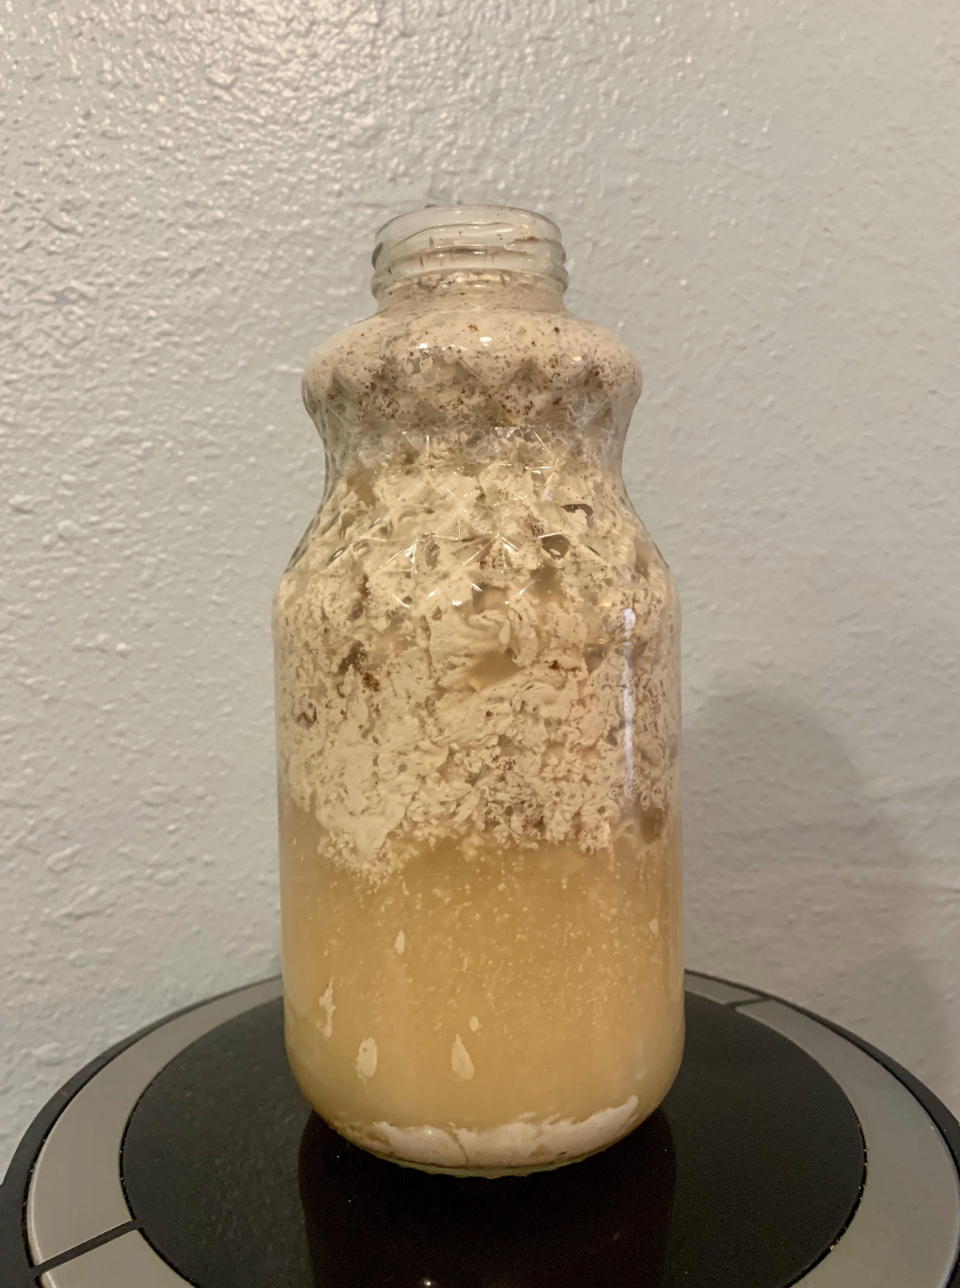 This creation has separated in a jar, with liquid at the bottom and whatever was supposed to be mixed into it rising to the top